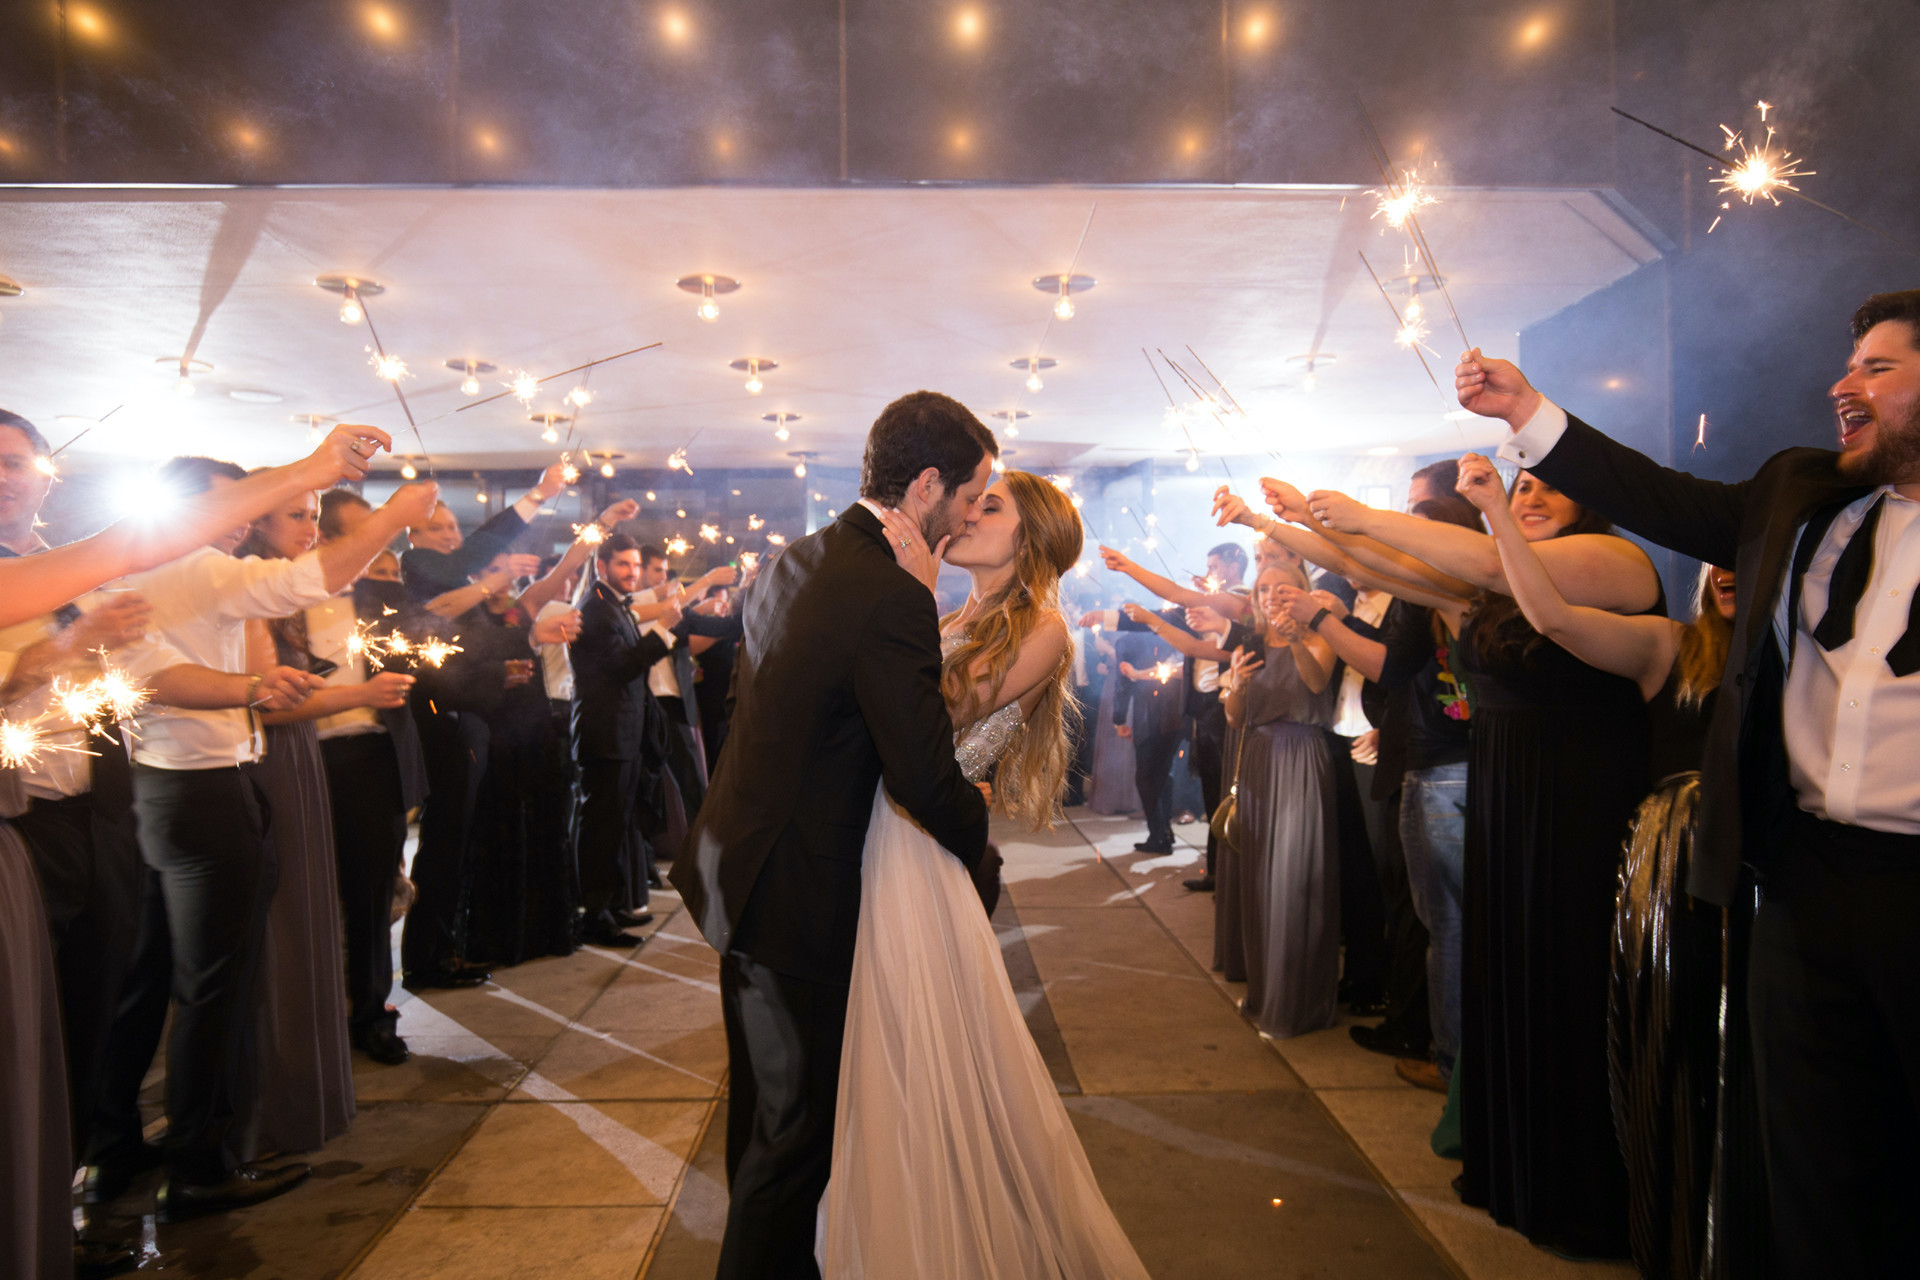 A bride and groom kissing at their wedding send off at Four Seasons Houston. Their guests have sparklers lit around them.